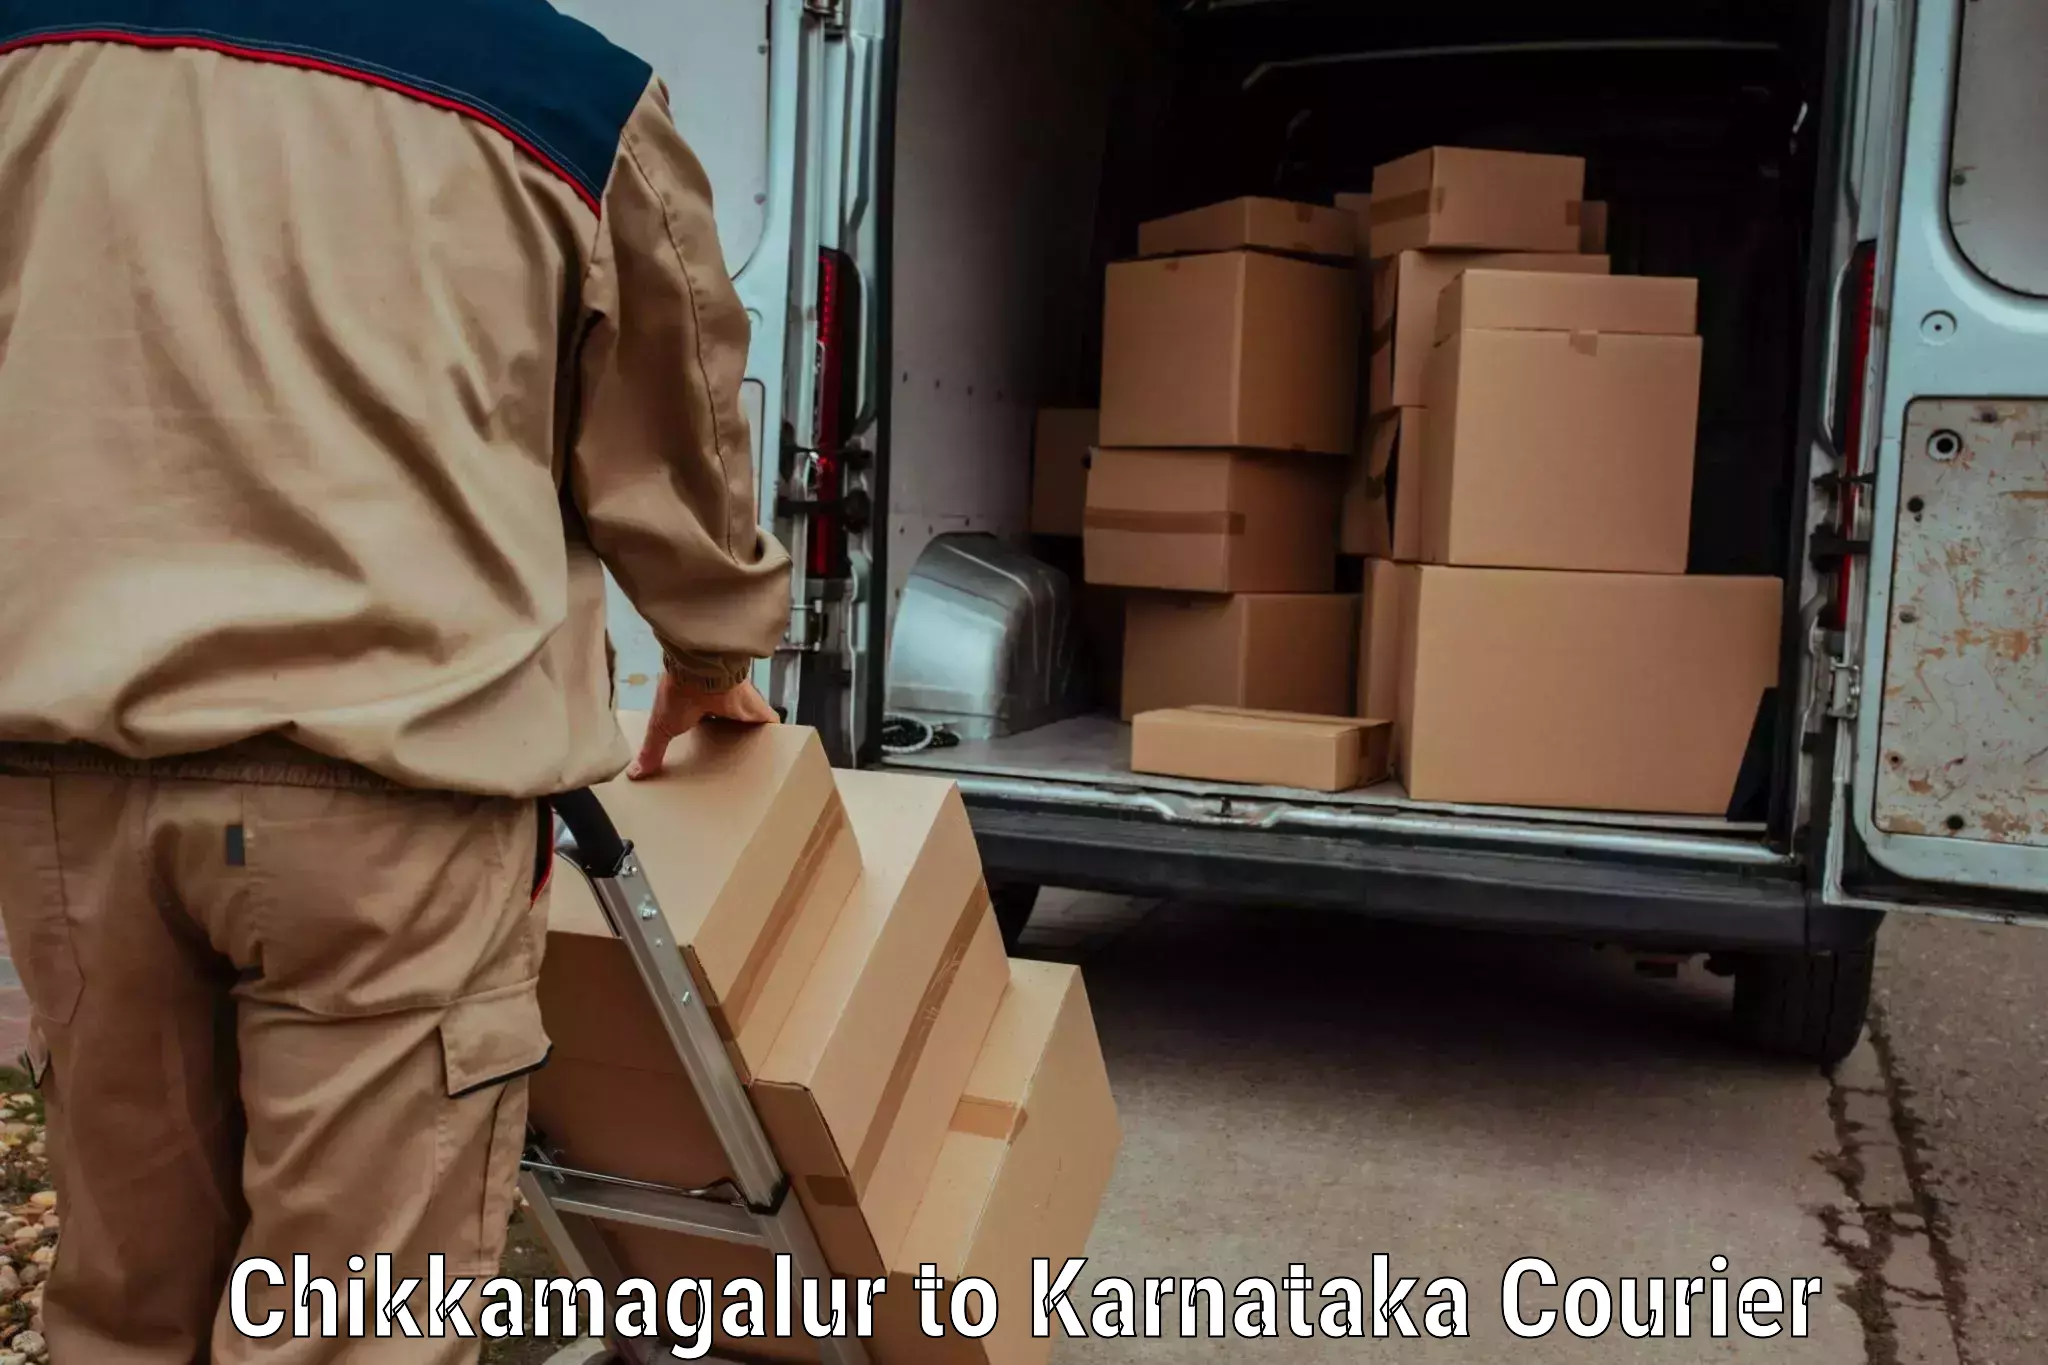 Online package tracking Chikkamagalur to Thirthahalli